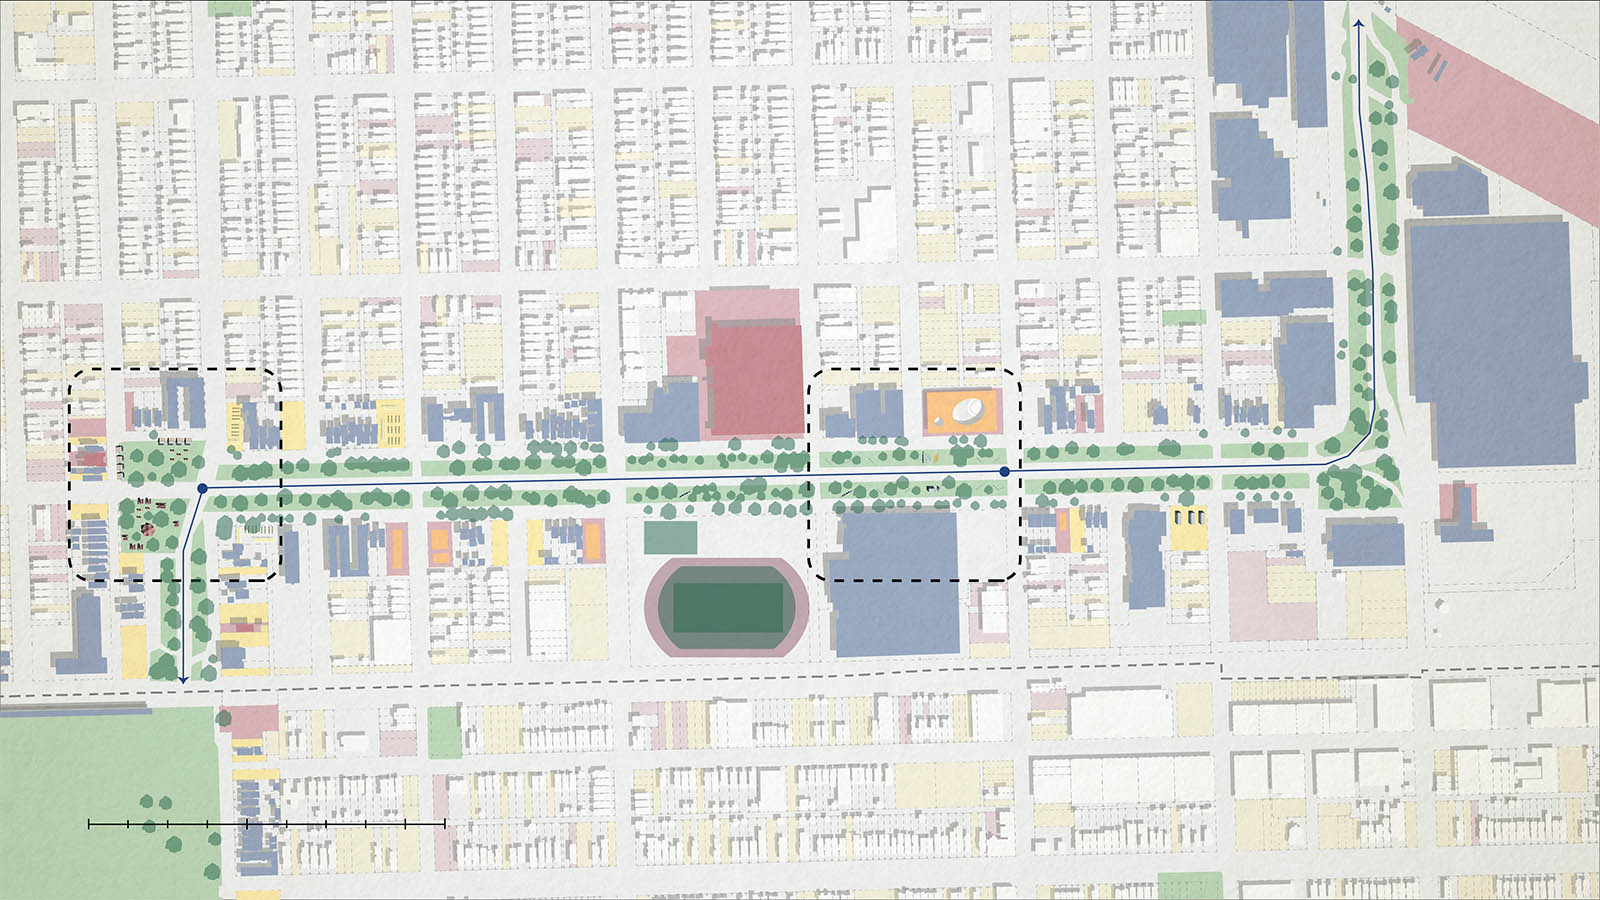 map of chicago with the central boulevard high lighted in color: green, red, blue